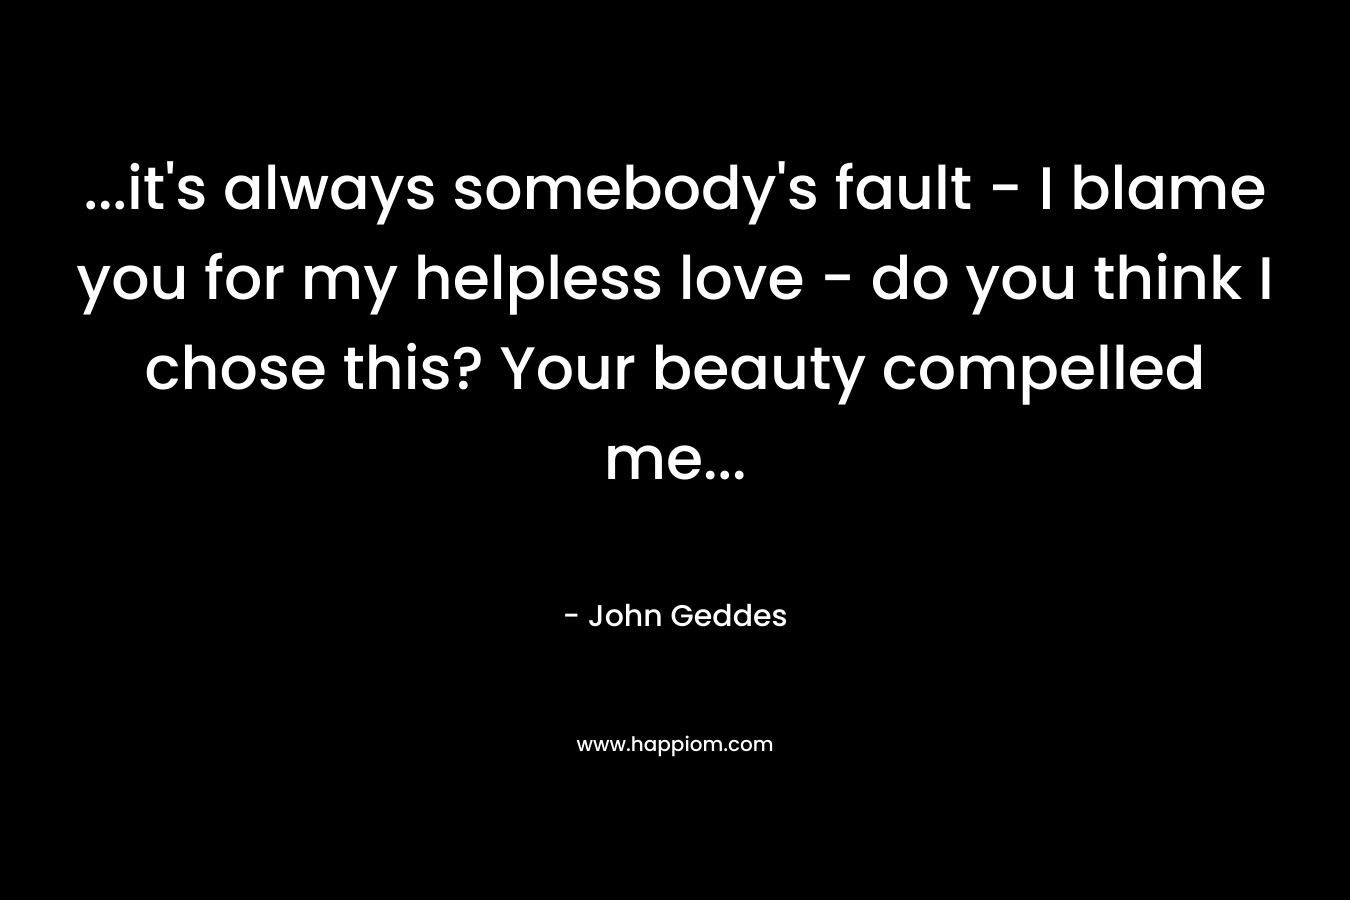 …it’s always somebody’s fault – I blame you for my helpless love – do you think I chose this? Your beauty compelled me… – John Geddes